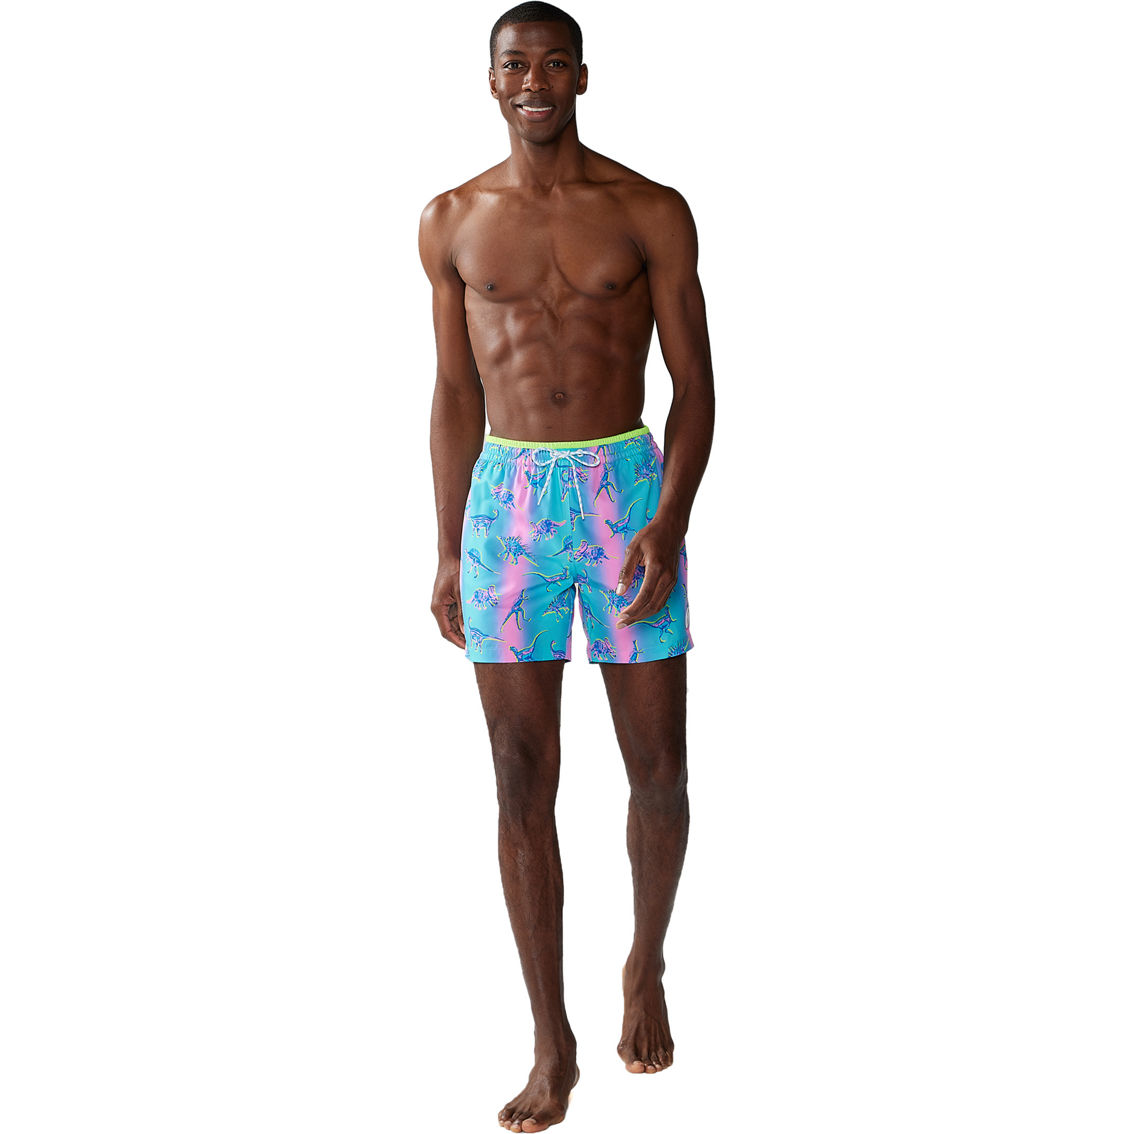 Chubbies The Dino Delights 5.5 in. Classic Lined Trunks - Image 4 of 4